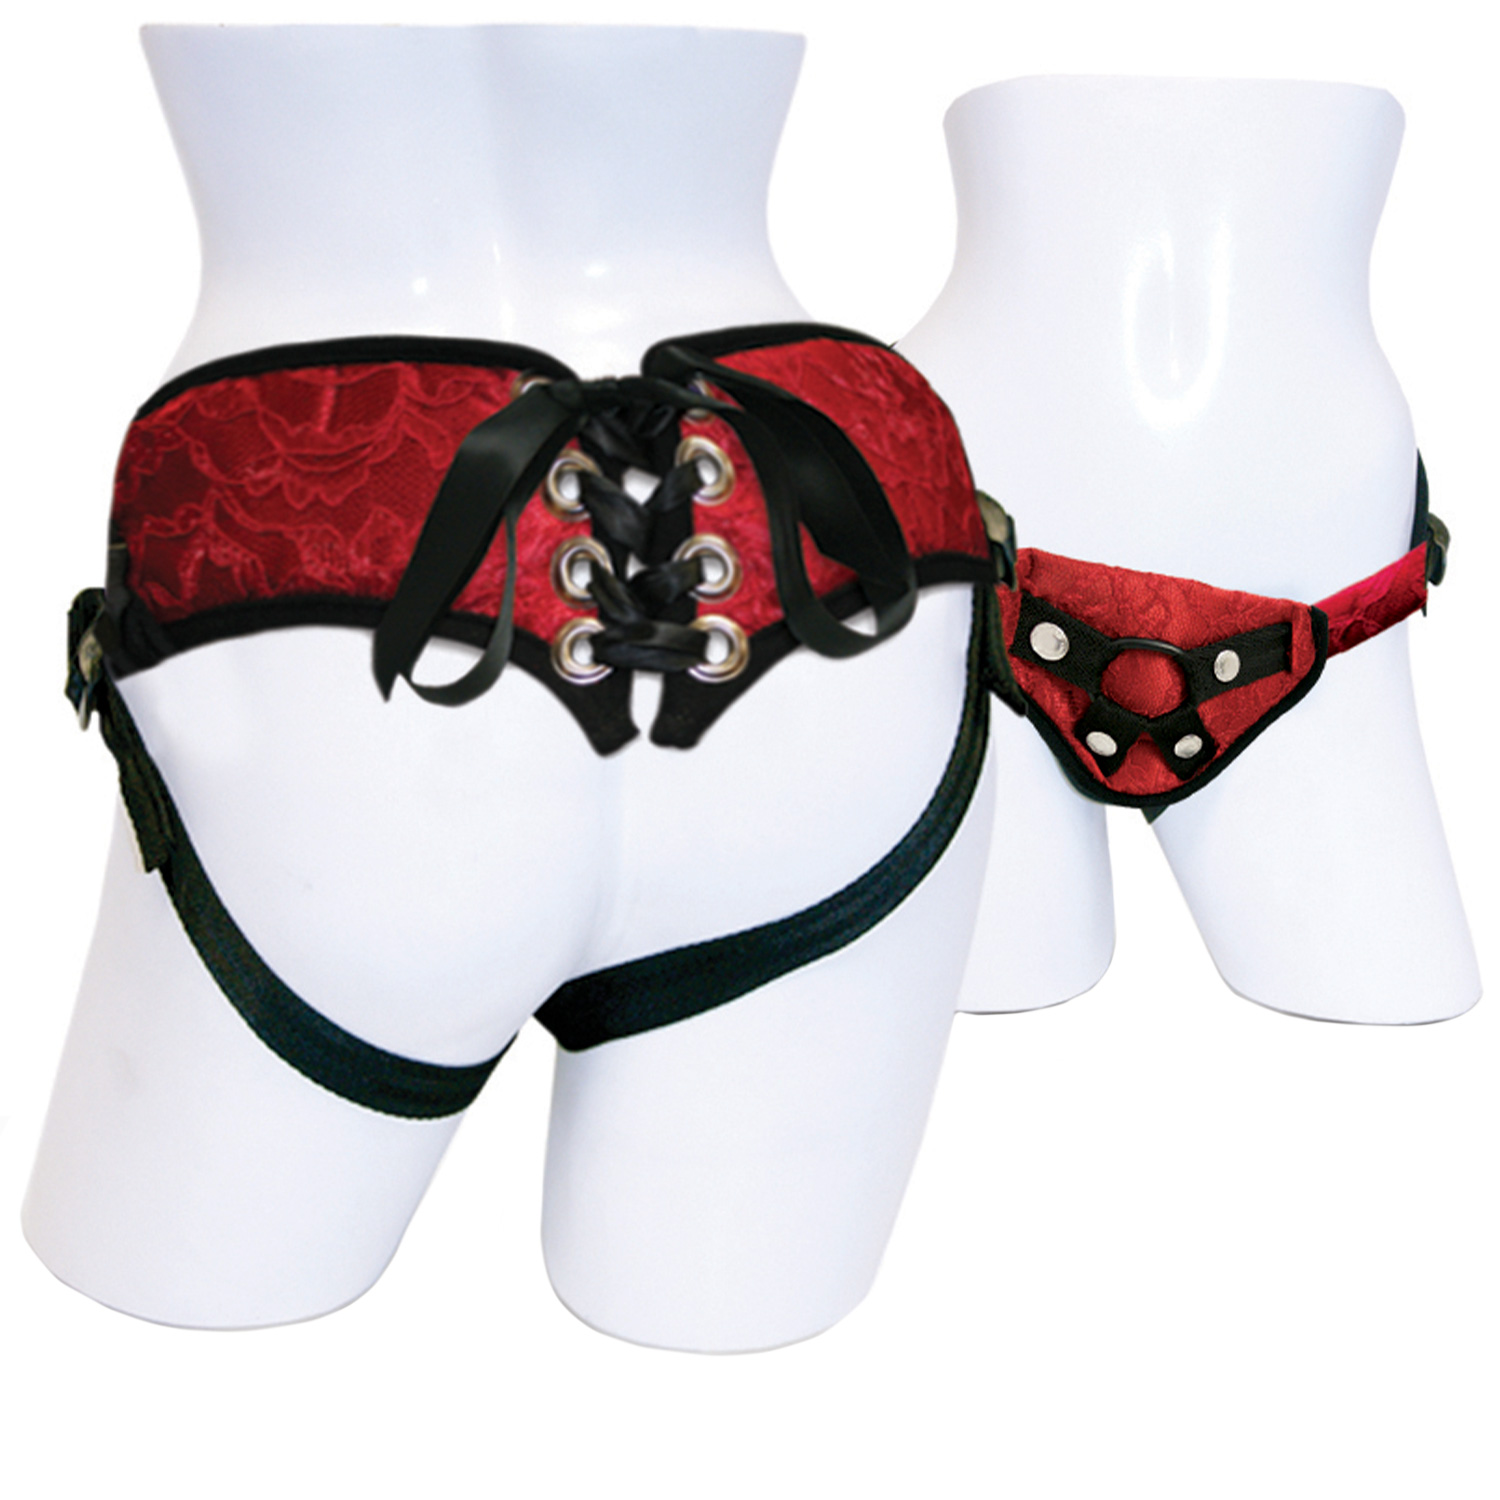 Sportsheets Red Lace Korset Strap-On Harness